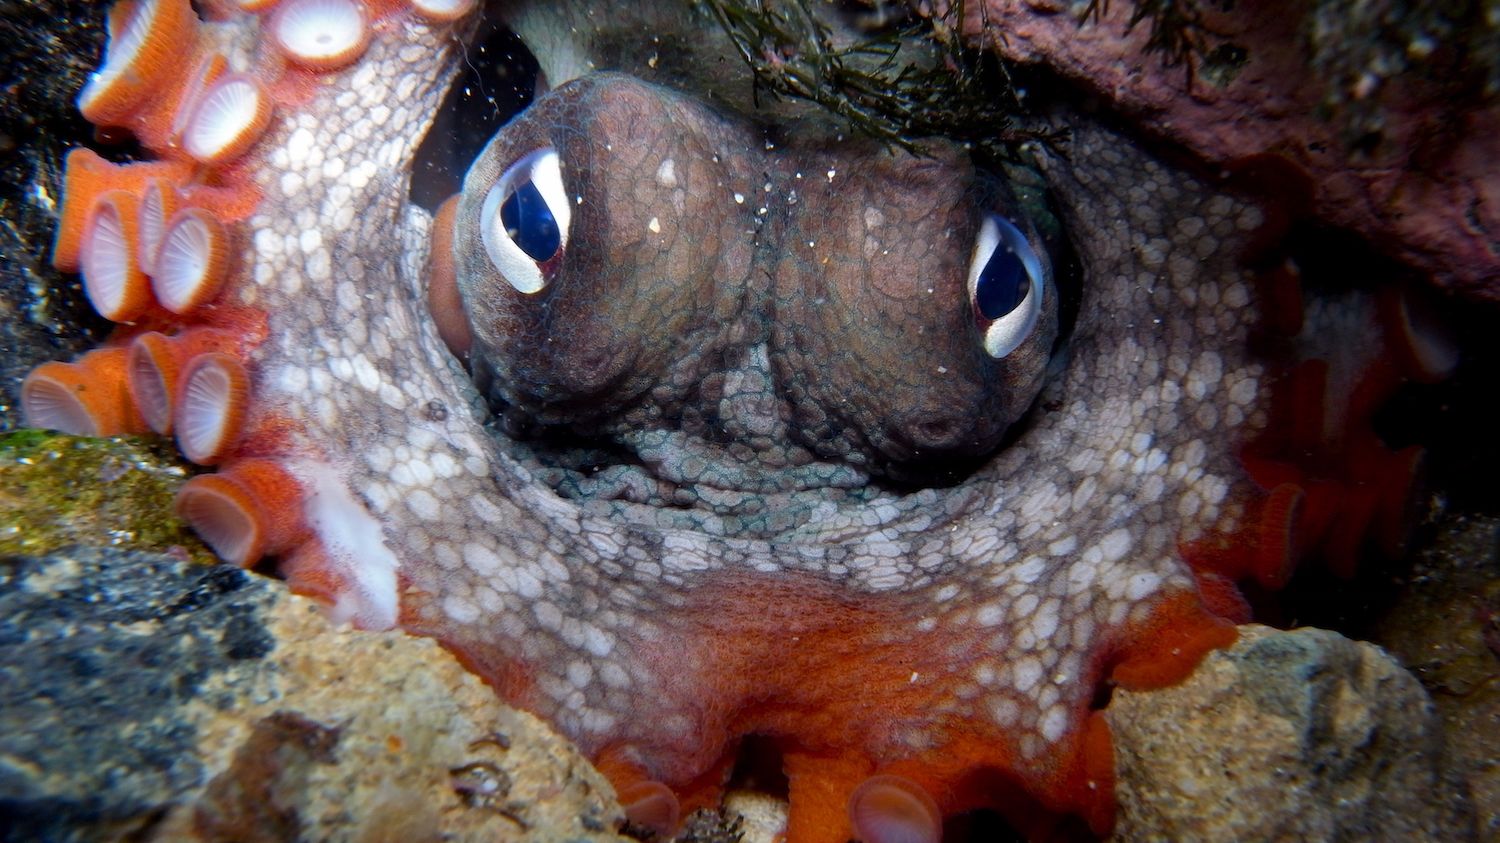 Scientists are discovering “Octlantis”, a busy octopus city